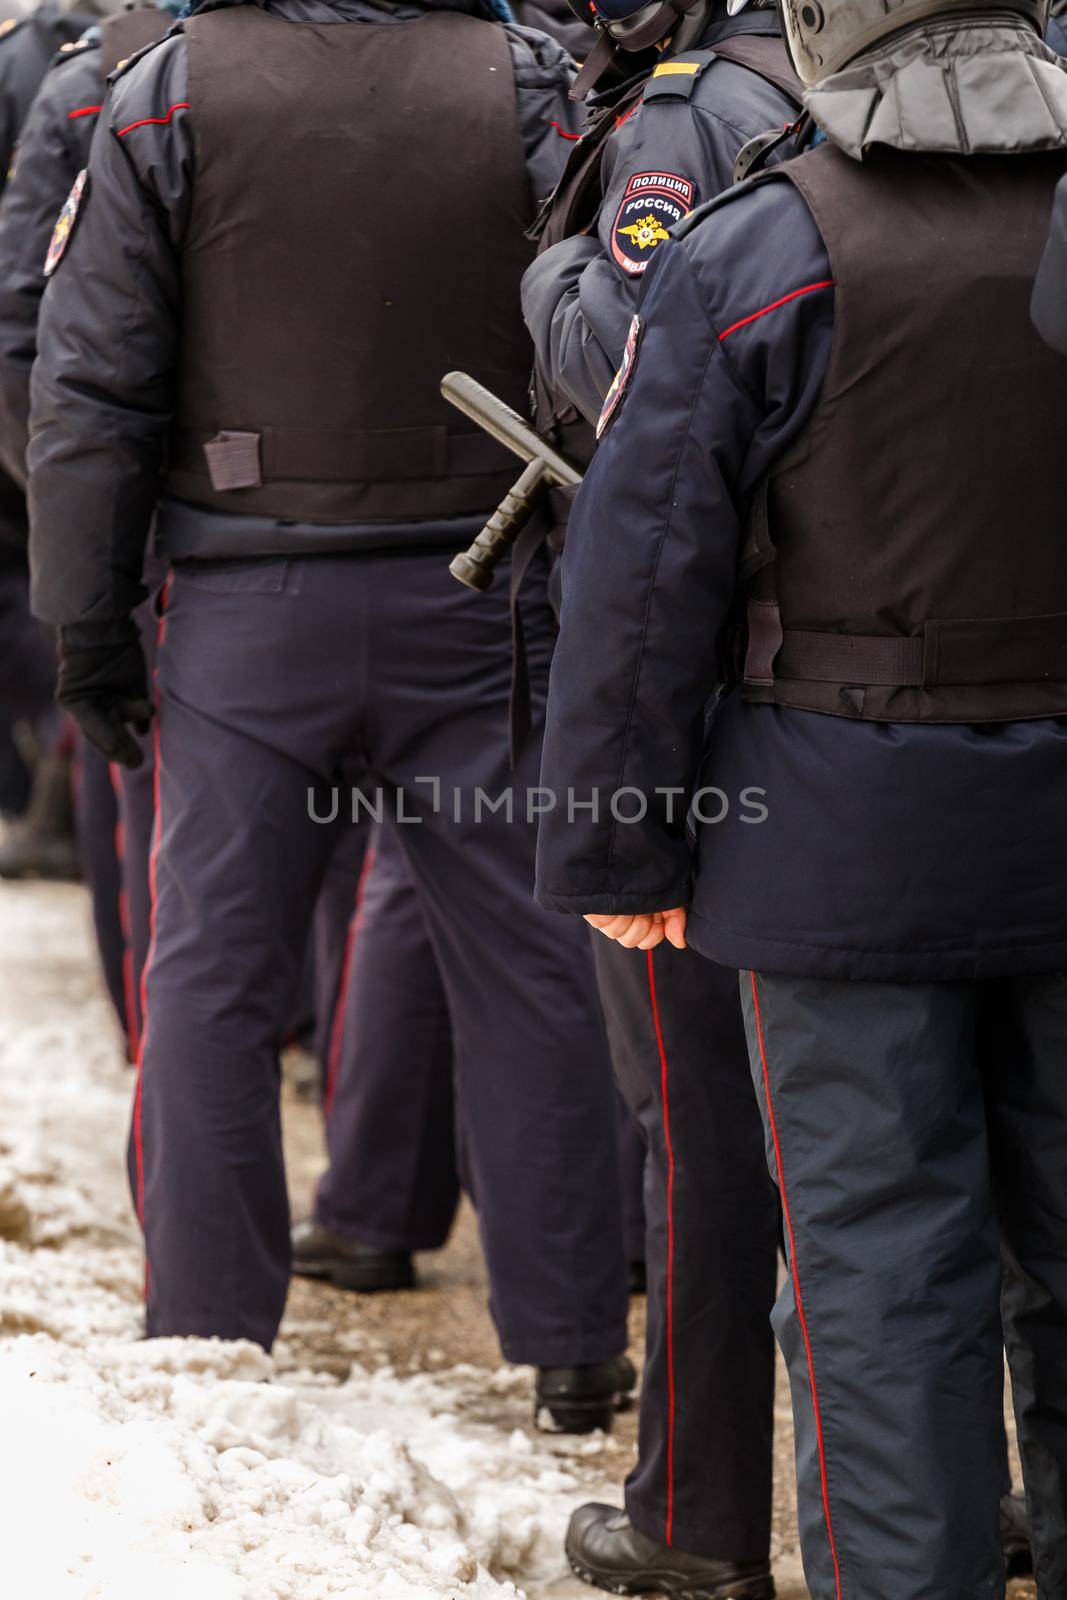 TULA, RUSSIA - JANUARY 23, 2021: Crowd of police officers in black uniform with bulletproof vests and pistols - view from back. Close-up.